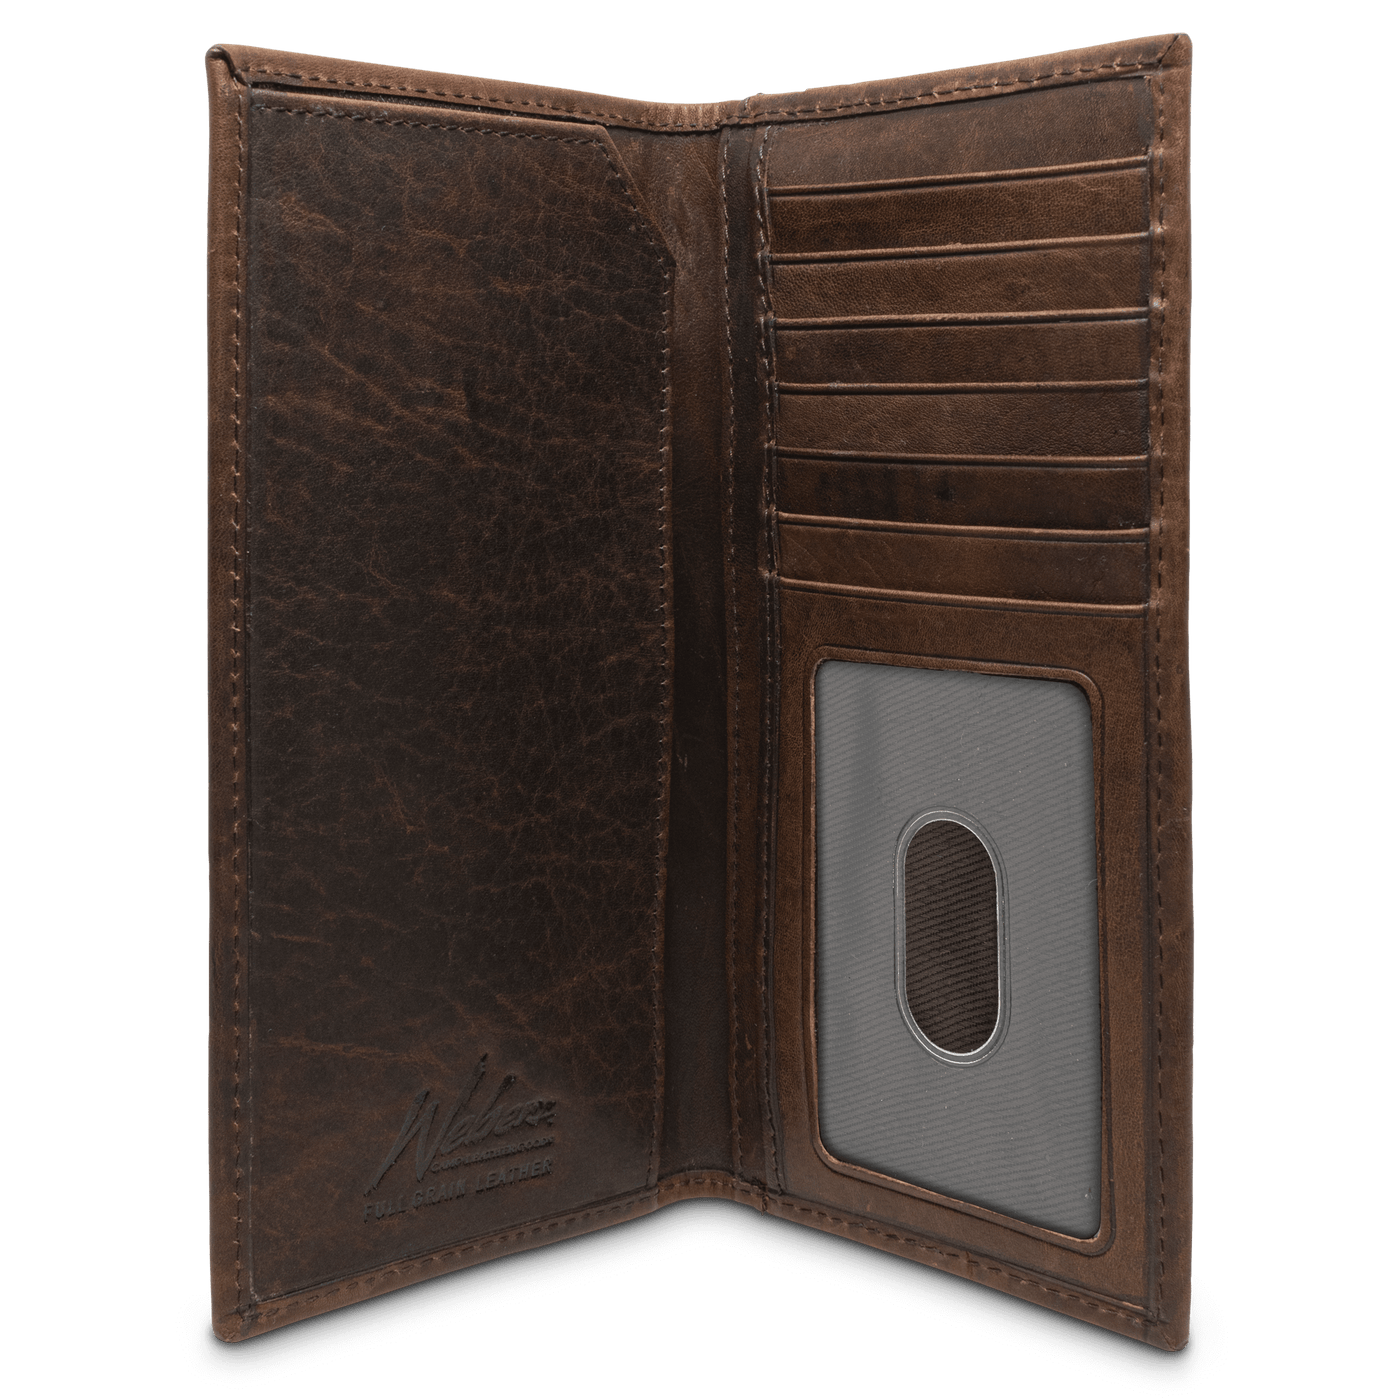 Every outdoor enthusiast needs a Dynasty Rodeo Shotshell Wallet, with premier full grain leather and a hand-oiled stylish finish. You won't be disappointed with this piece. 7 Card Slots ID Window 3 Bill/Receipt Pockets Exterior Easy Access Pocket Weber's Signature Shotshell Concho Dimensions: 3.67"L x 7.25"H RFID Protection Color: Brown